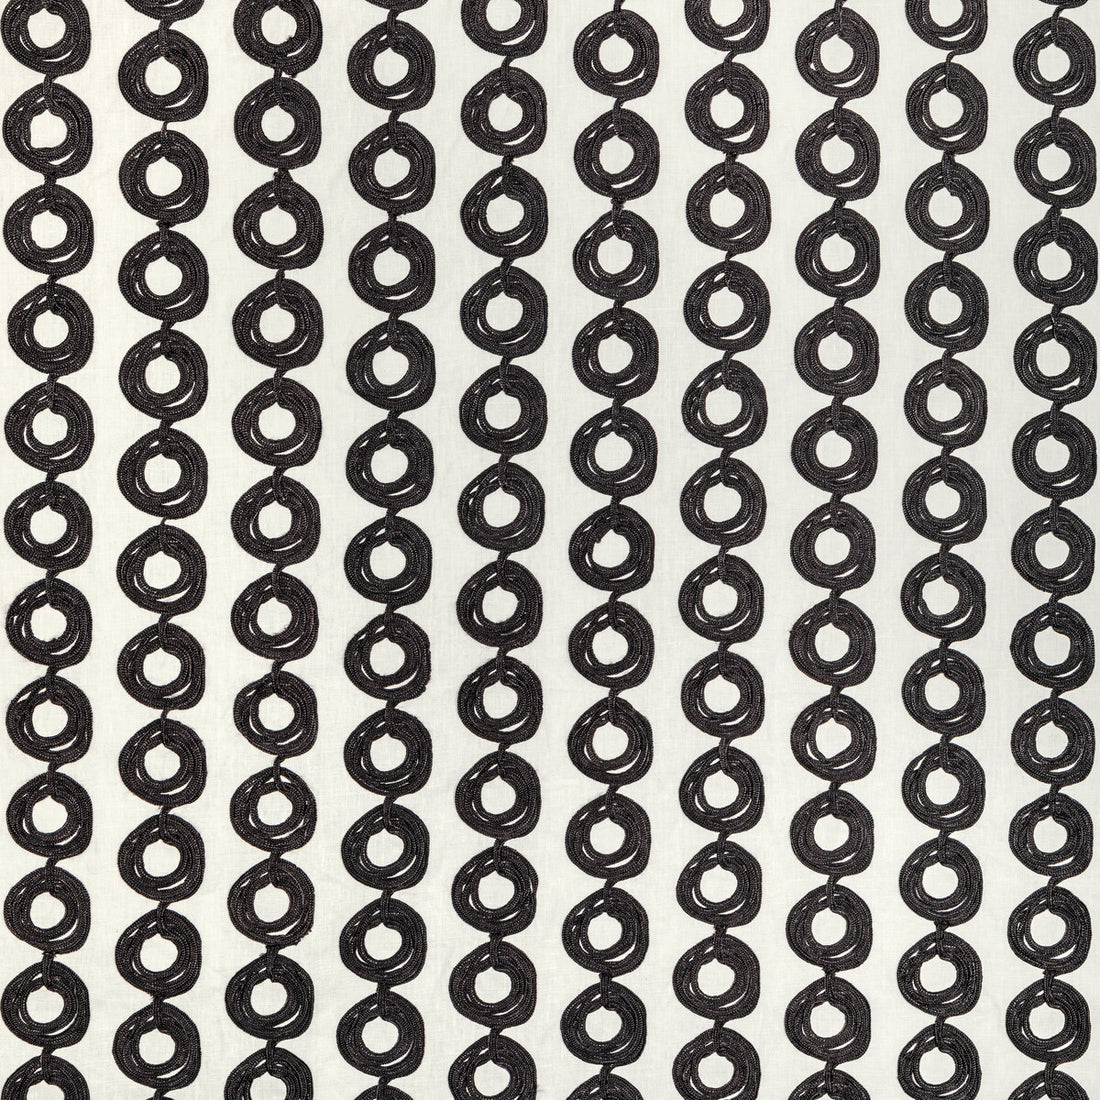 Coincide fabric in noir color - pattern 36338.81.0 - by Kravet Couture in the Modern Luxe III collection